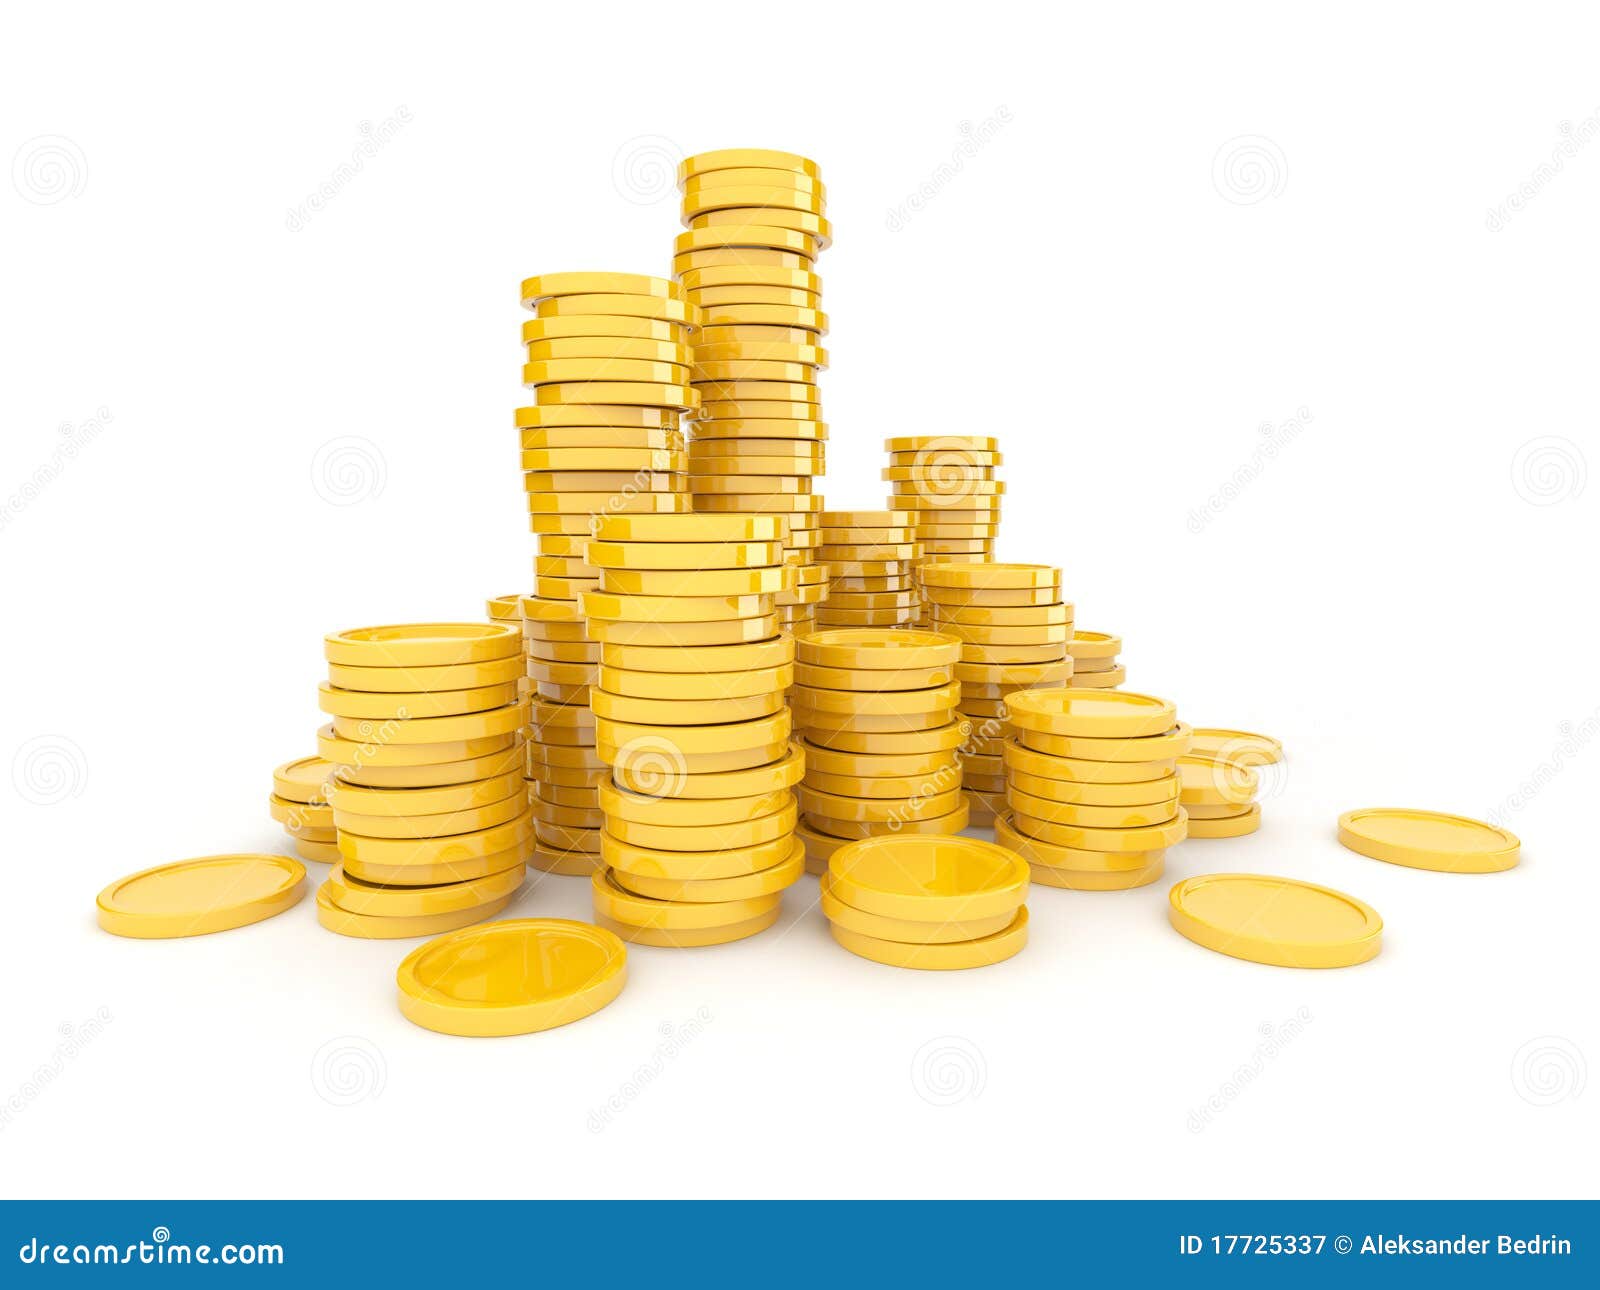 Gold Coins 3D Royalty Free Stock Photography - Image: 17725337